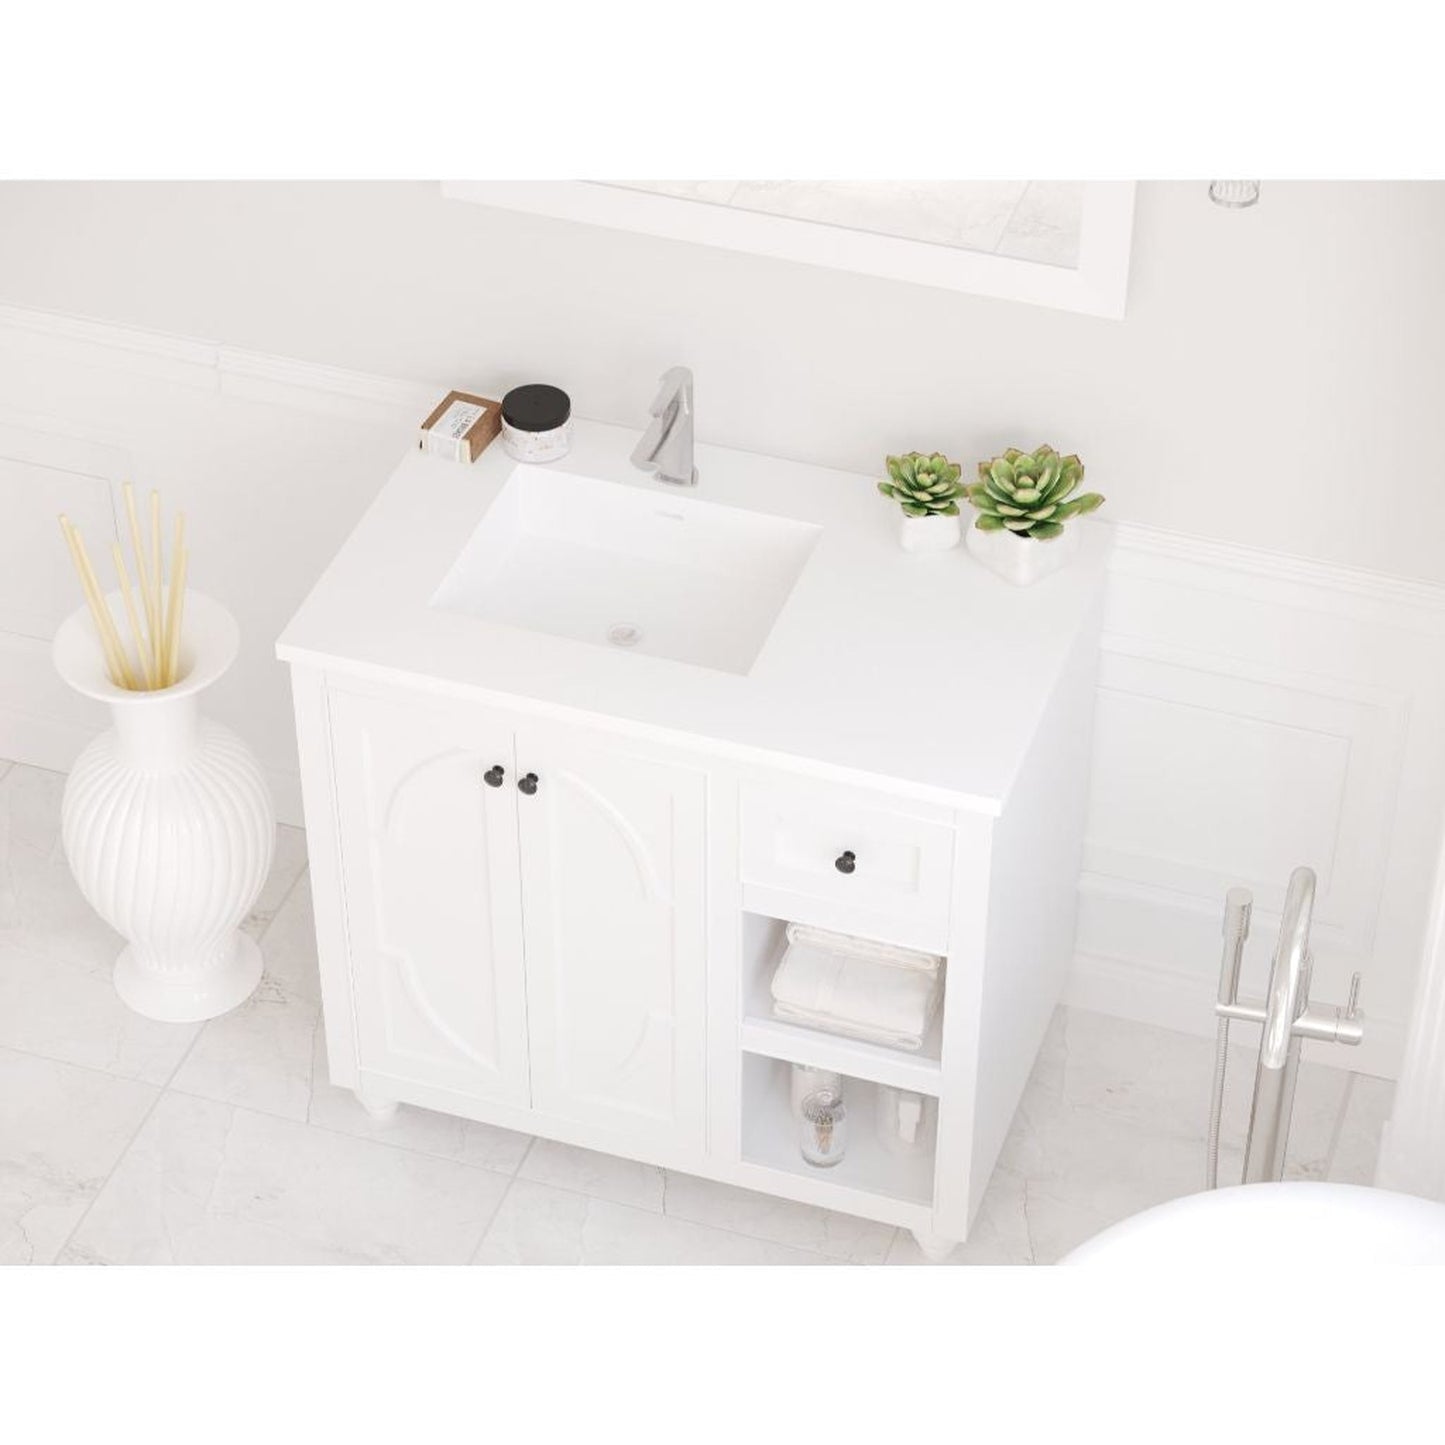 Laviva Forever 36" Matte White Viva Stone Solid Surface Countertop With Left Offset Integrated Sink